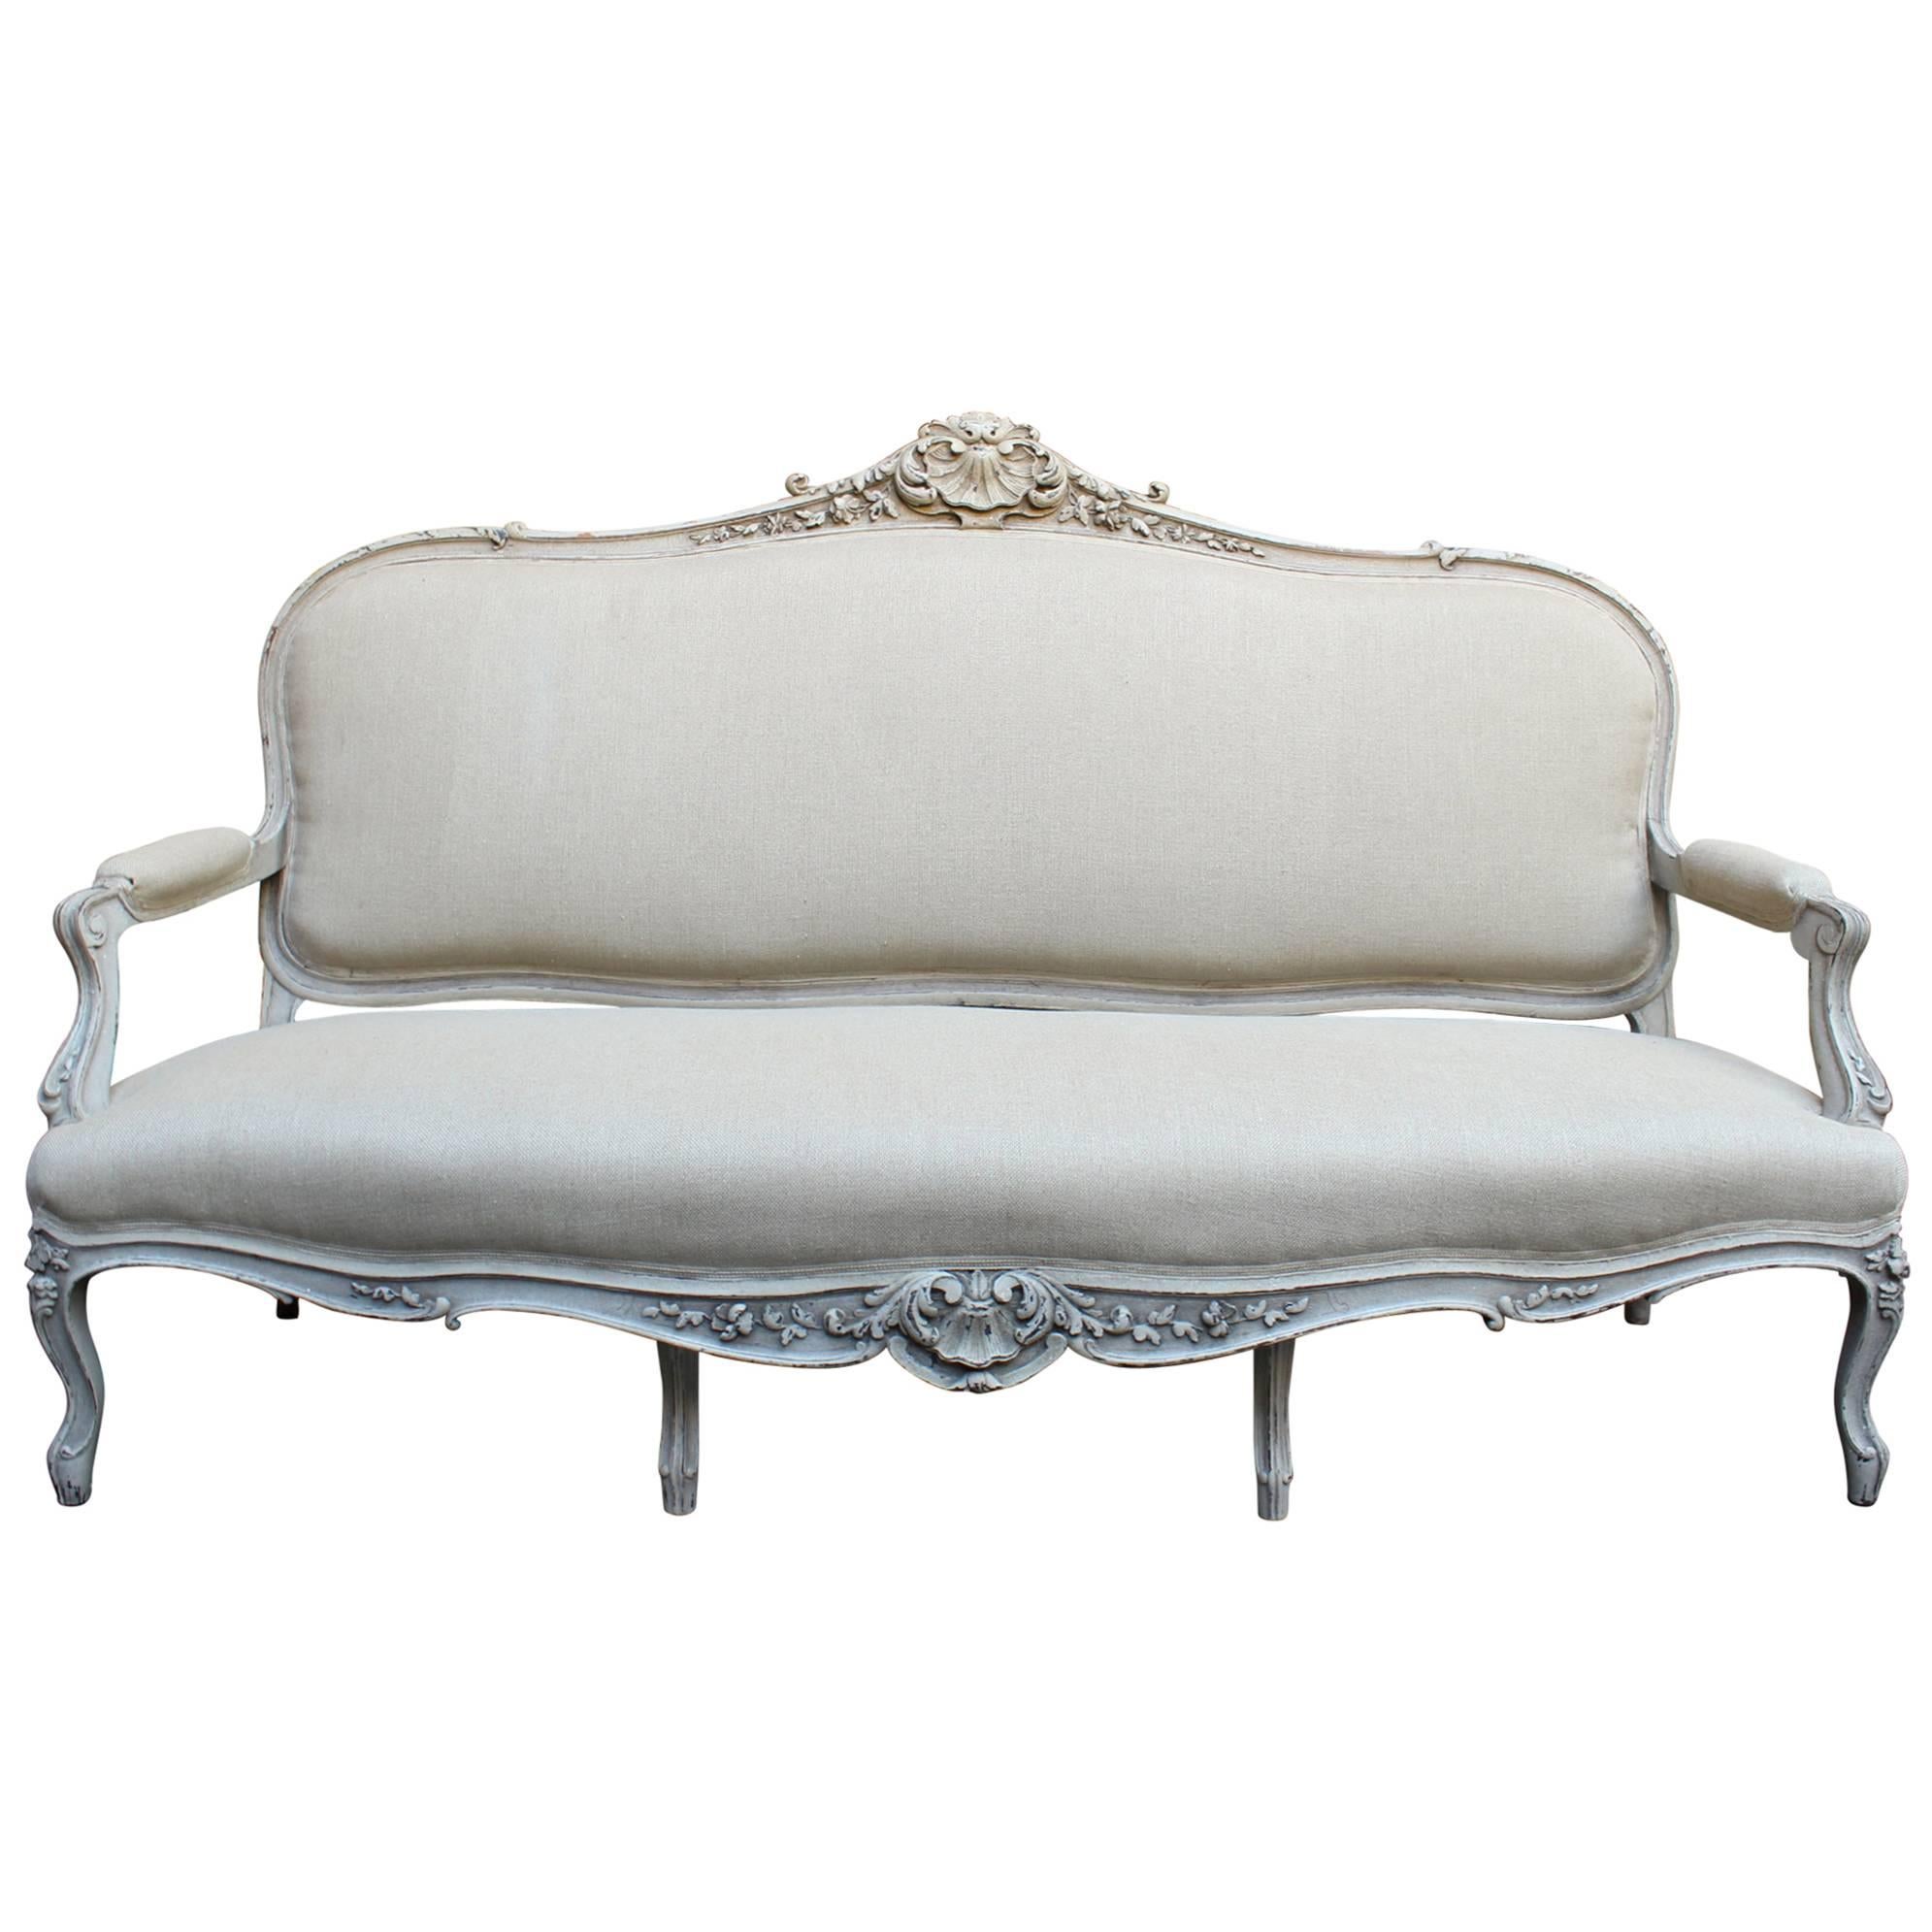 Early 19th Century French Canapé For Sale